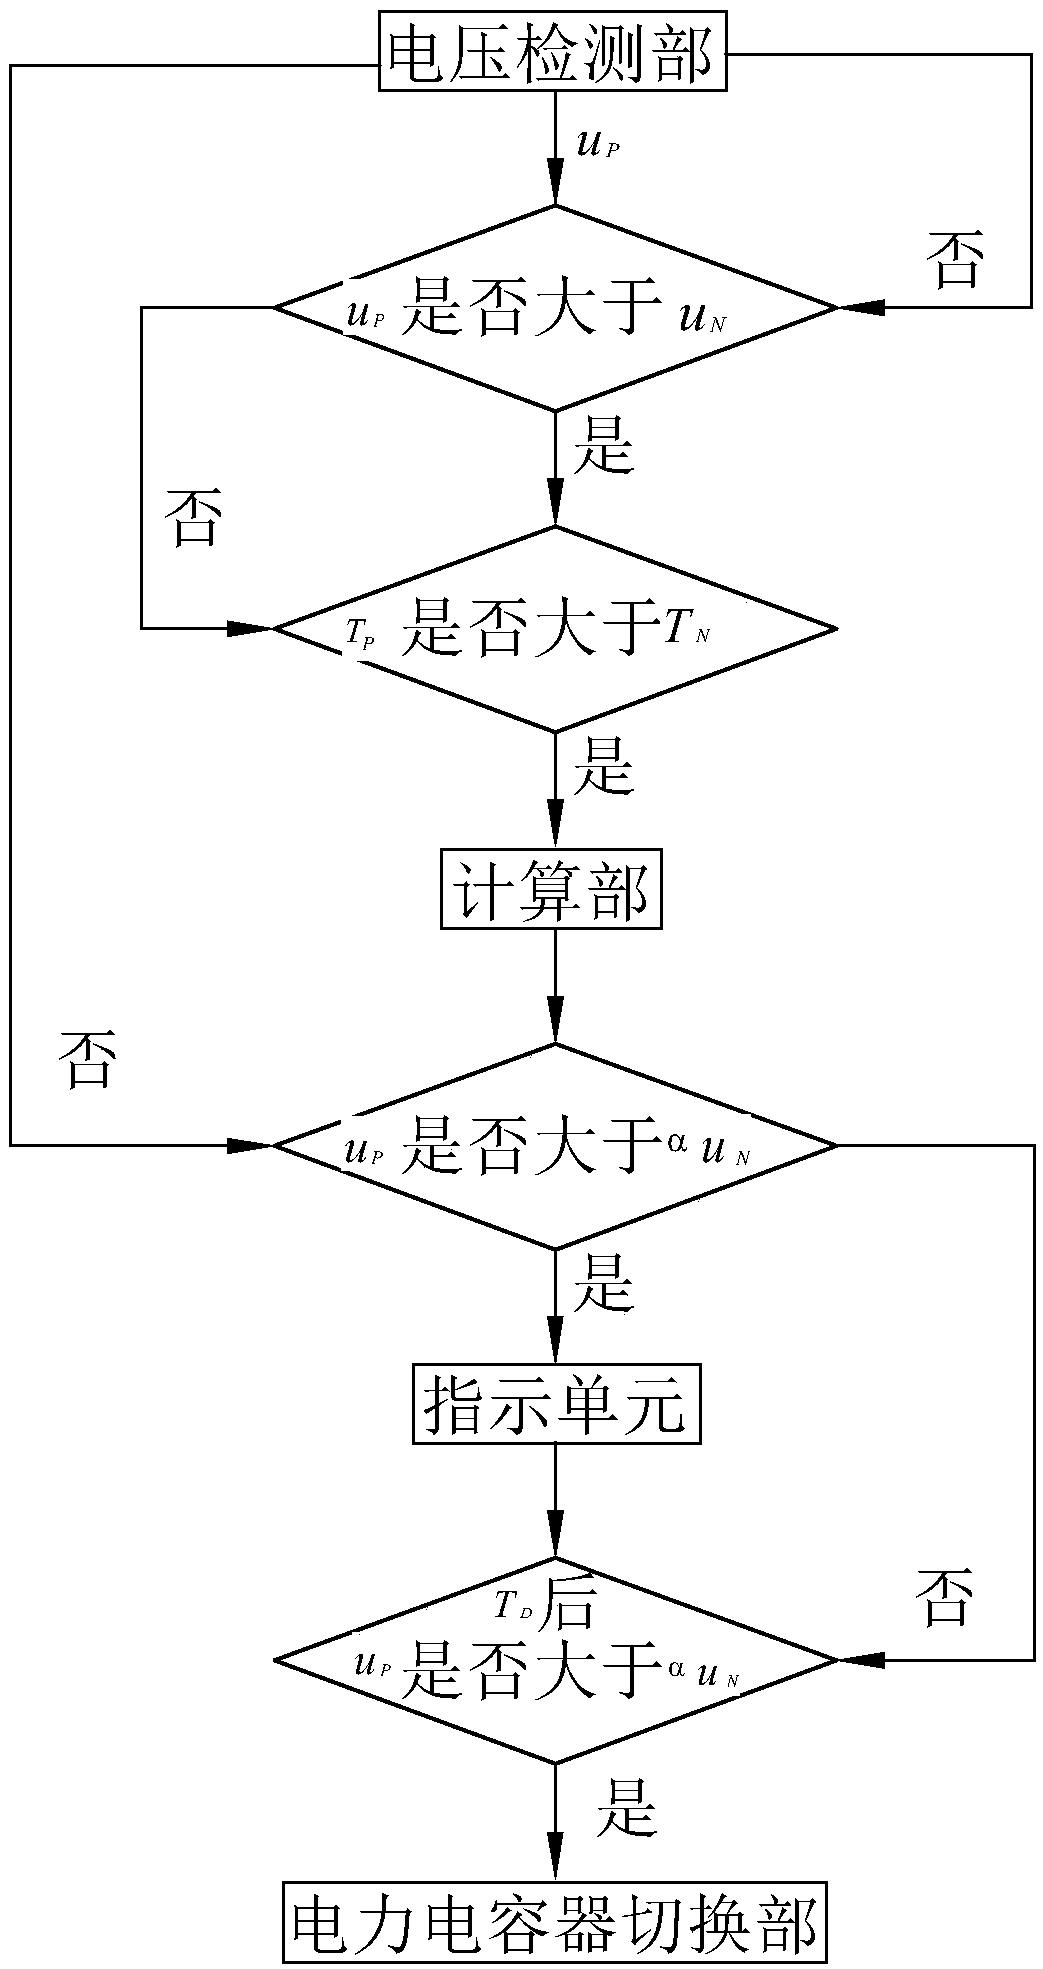 Management system of high-power large-capacity capacitor